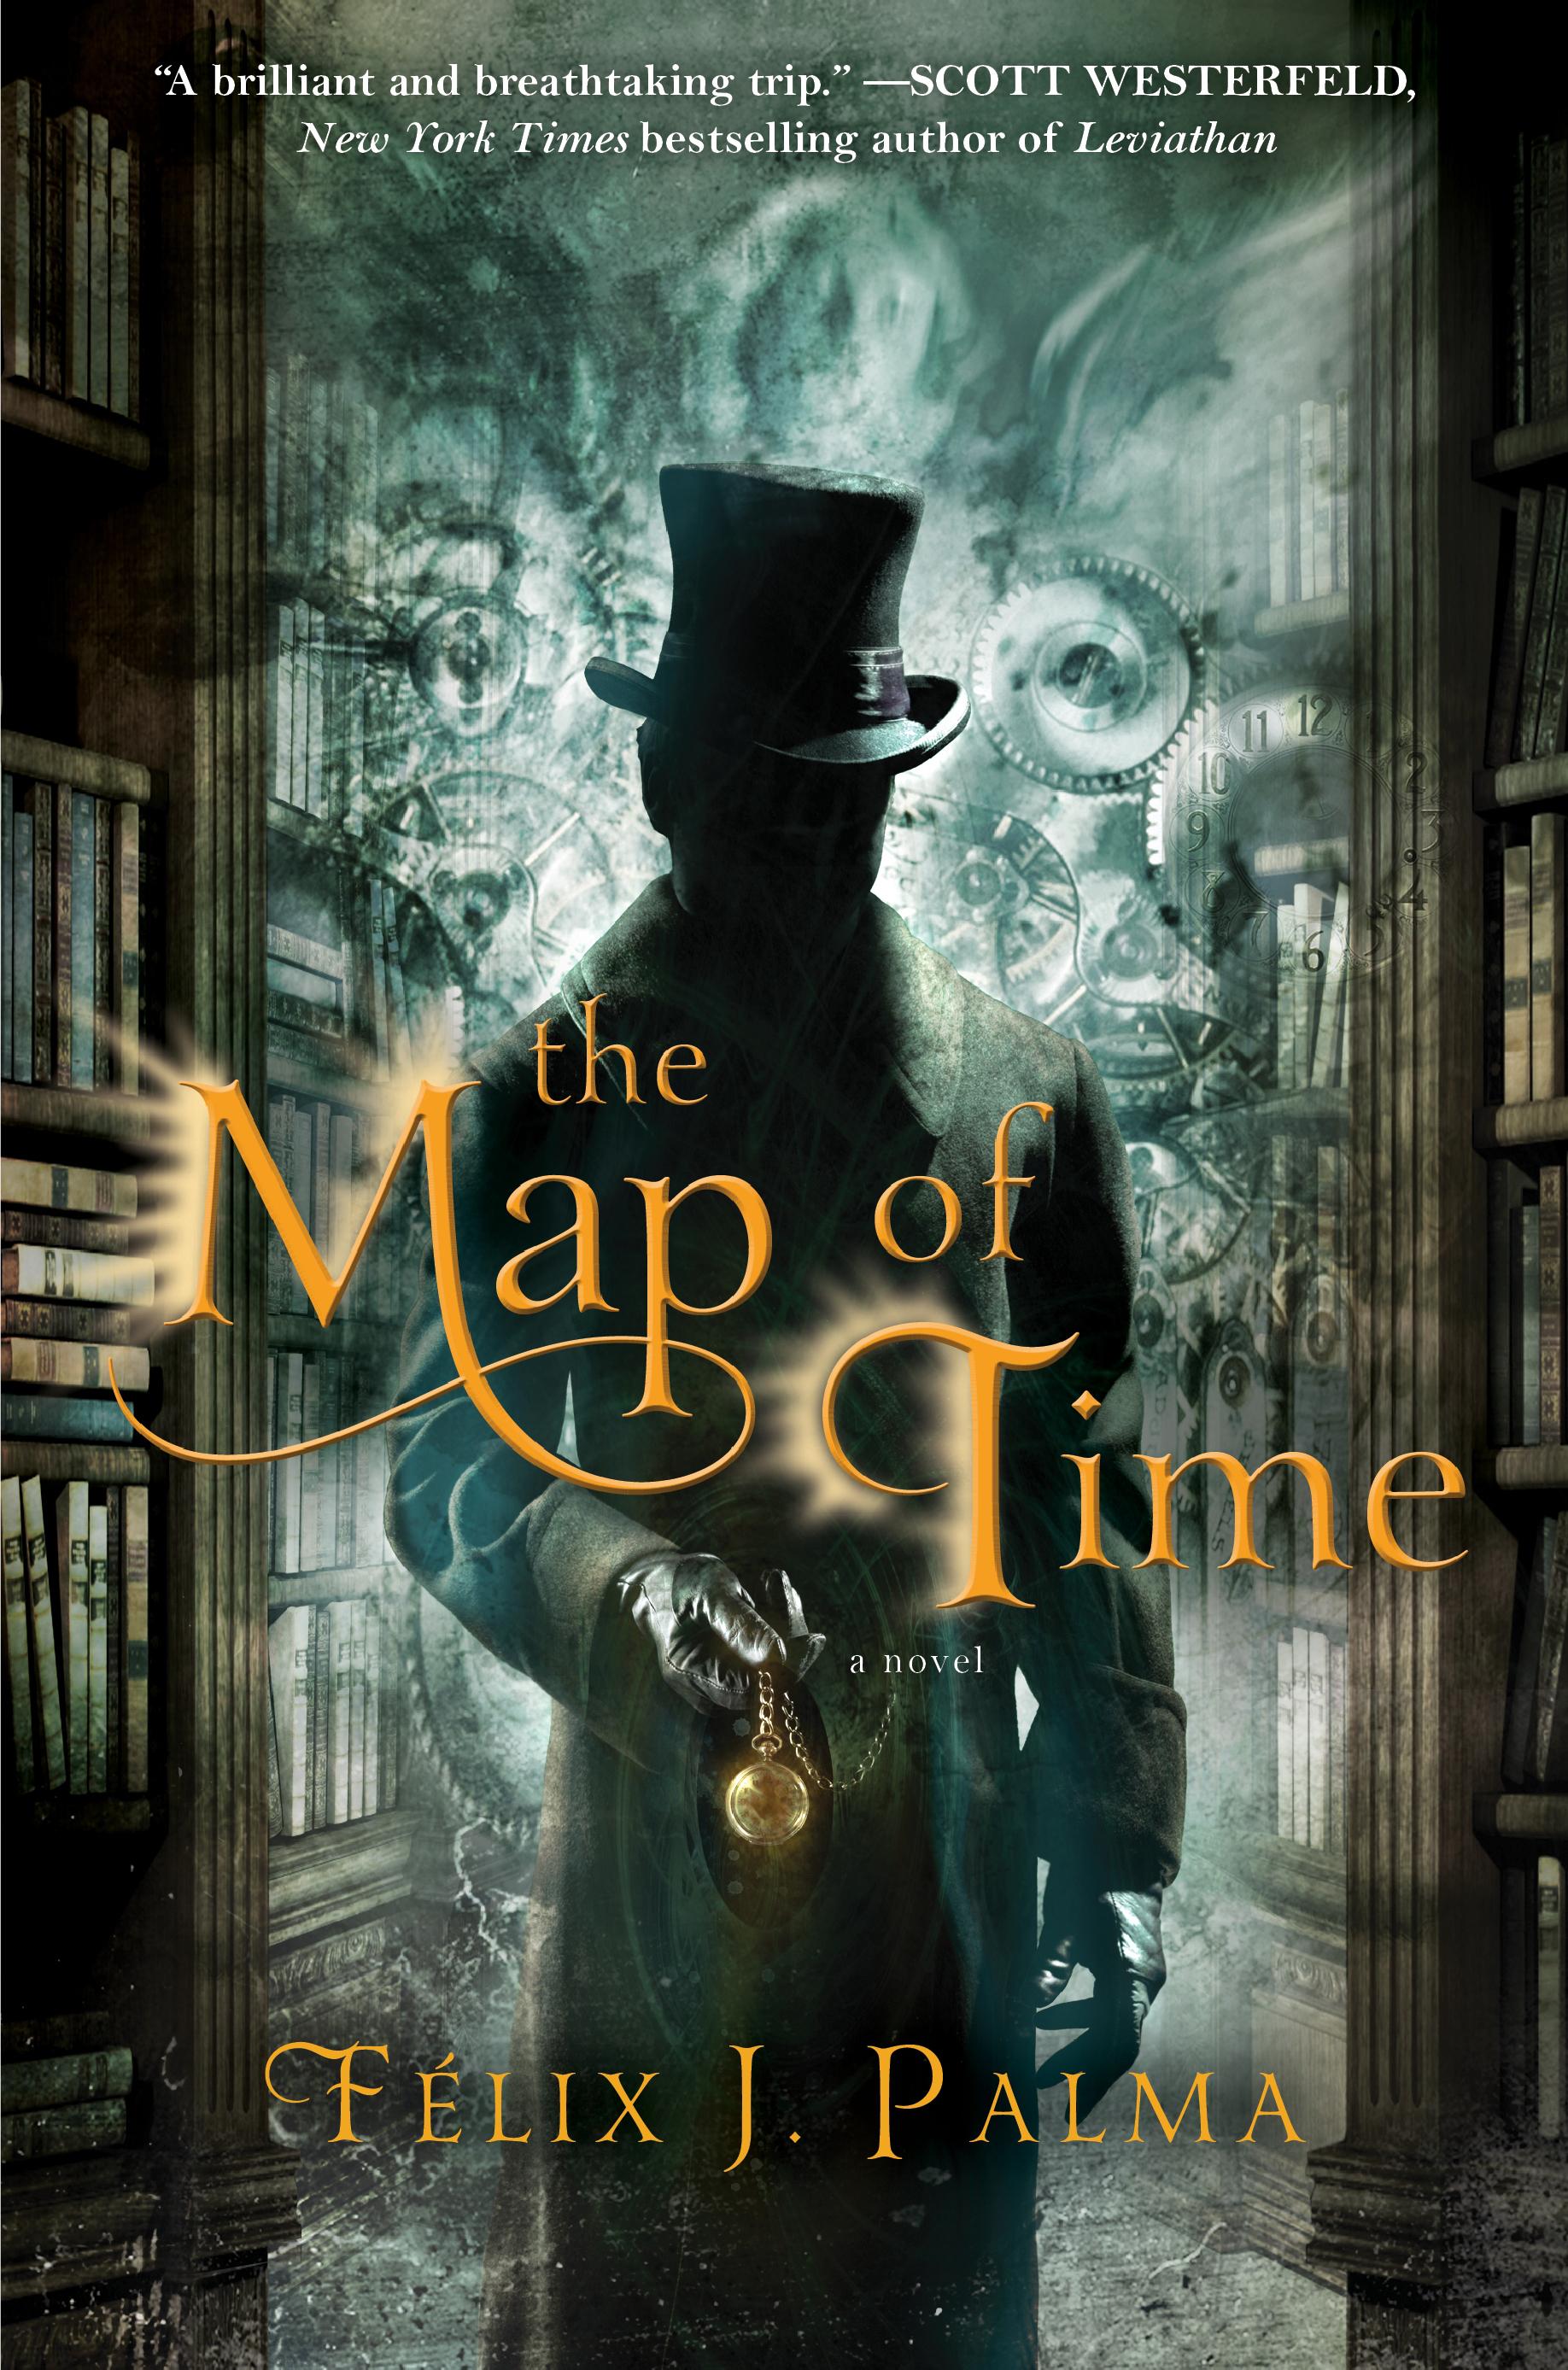 The Map of Time: Part two's sexy storyline